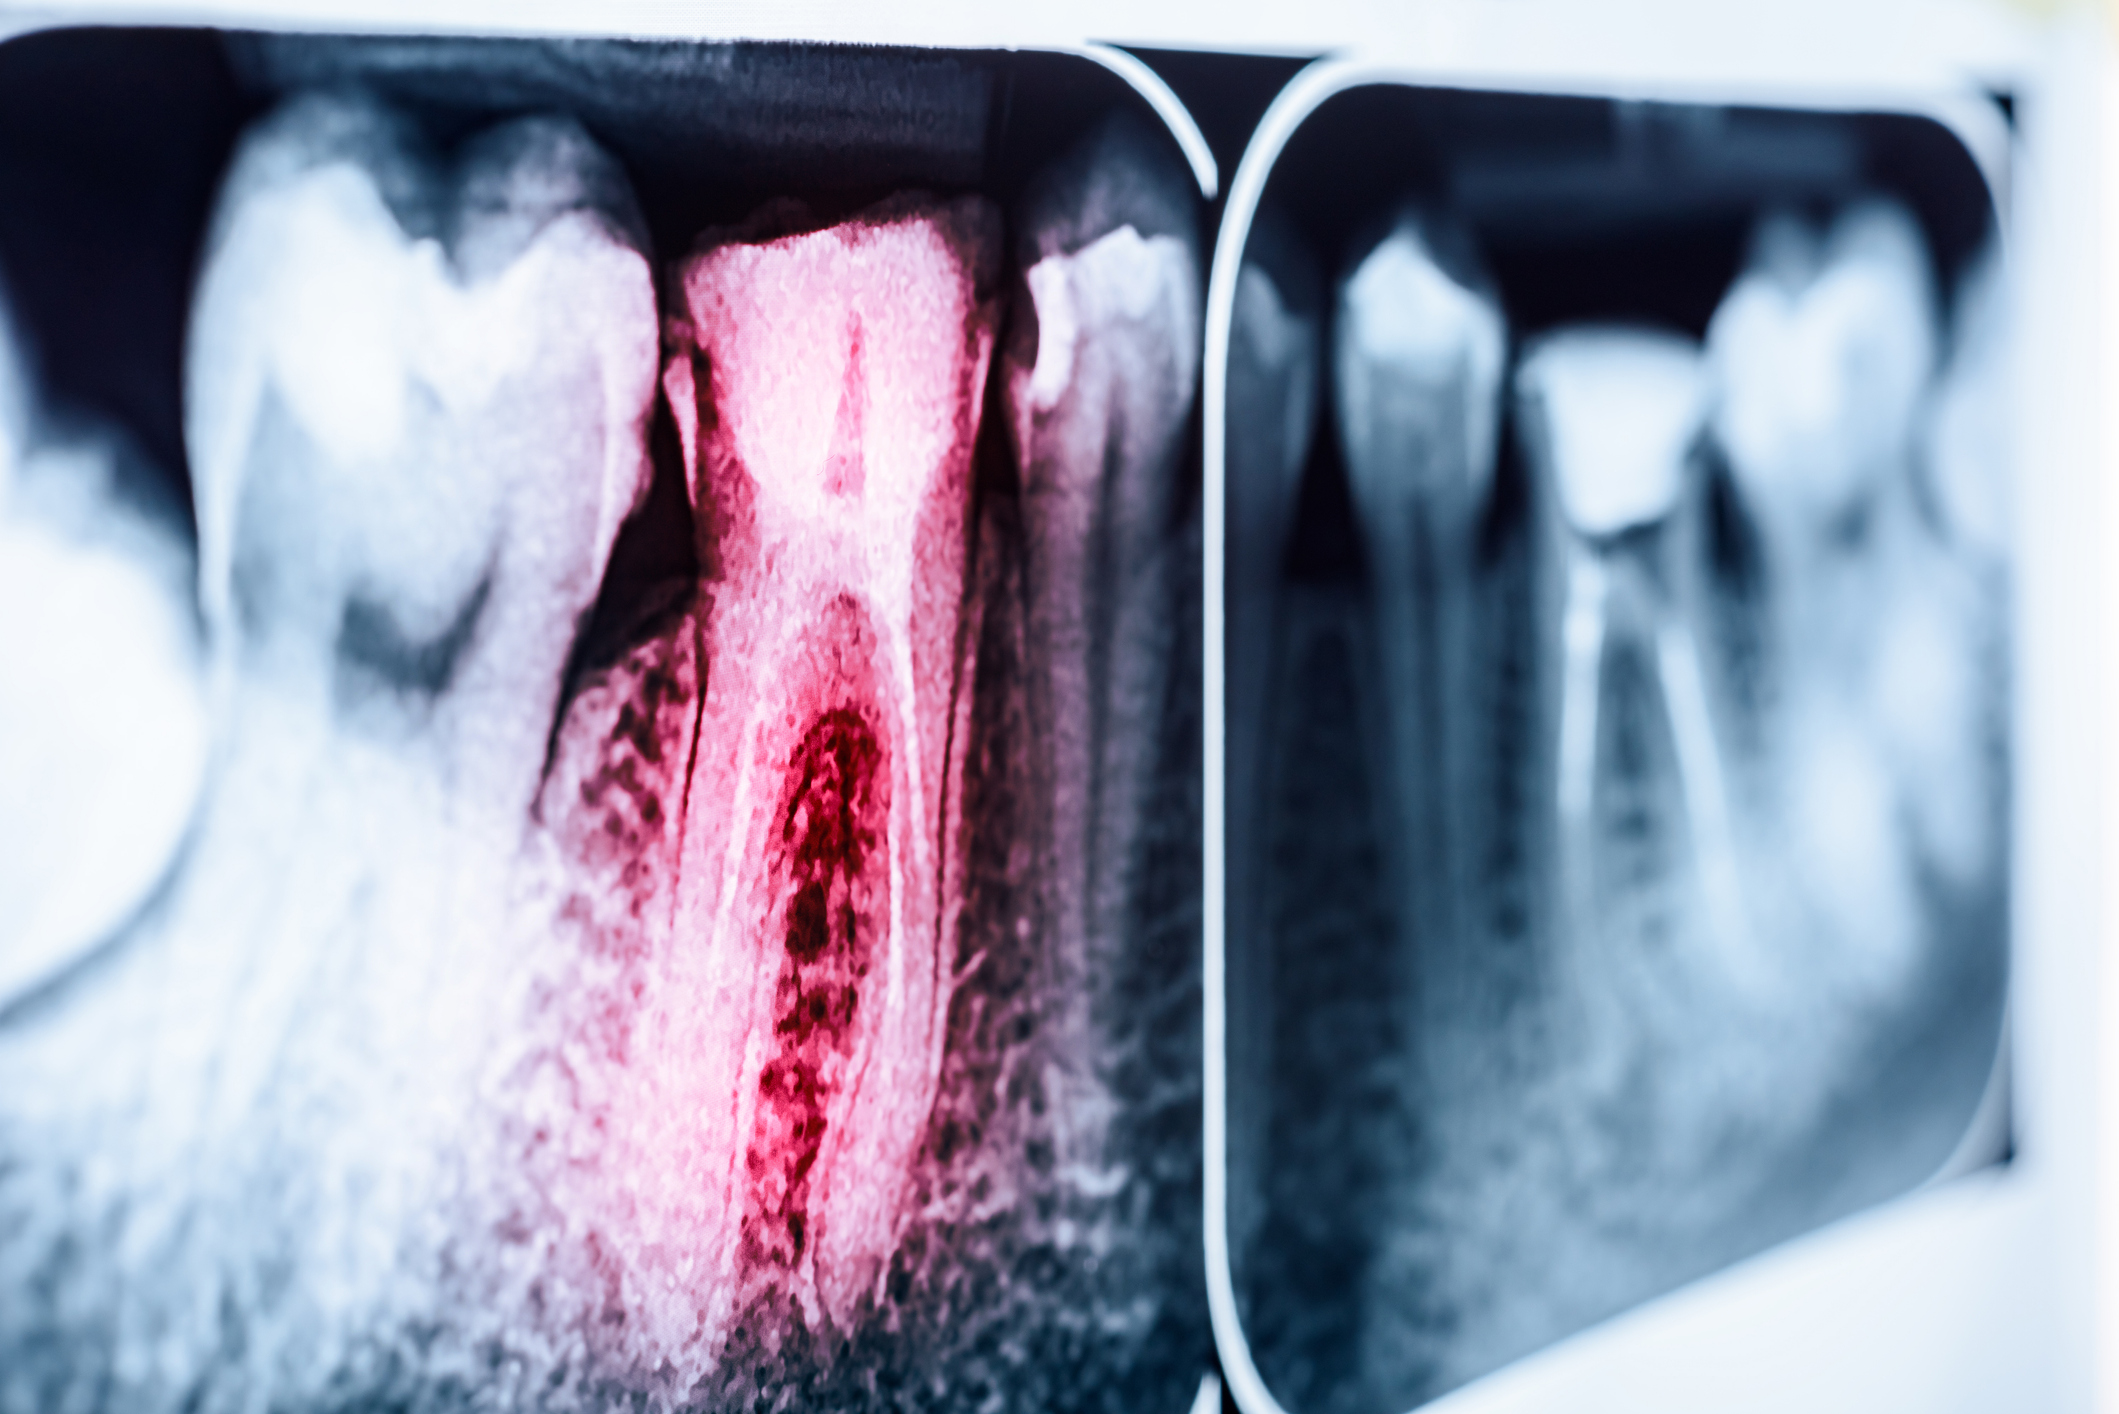 Pain Of Tooth Decay On X-Ray